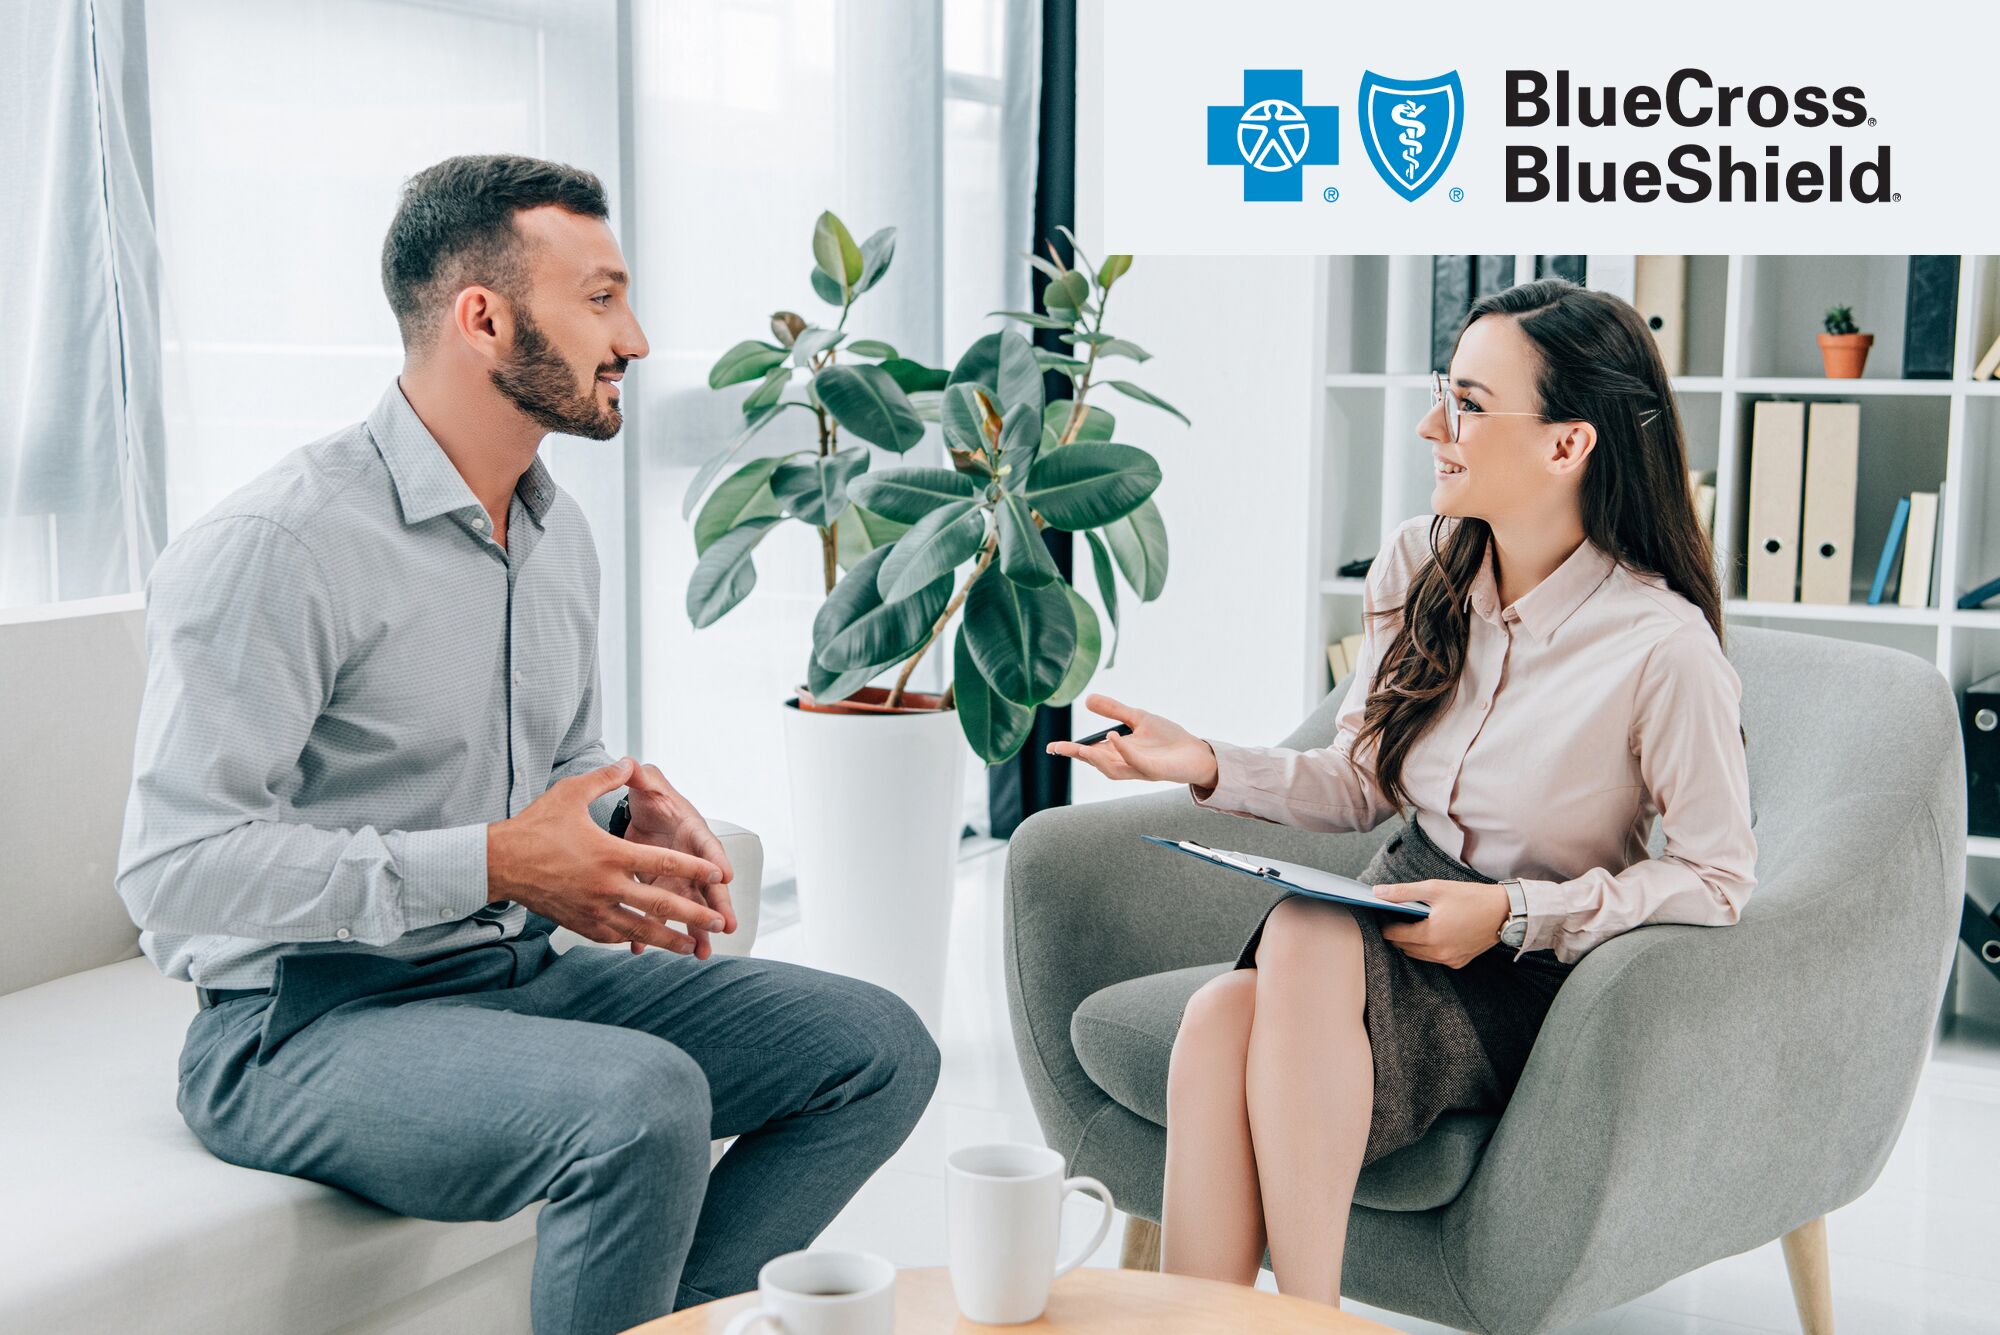 therapist discussing BlueCross BlueShield Insurance with a patient